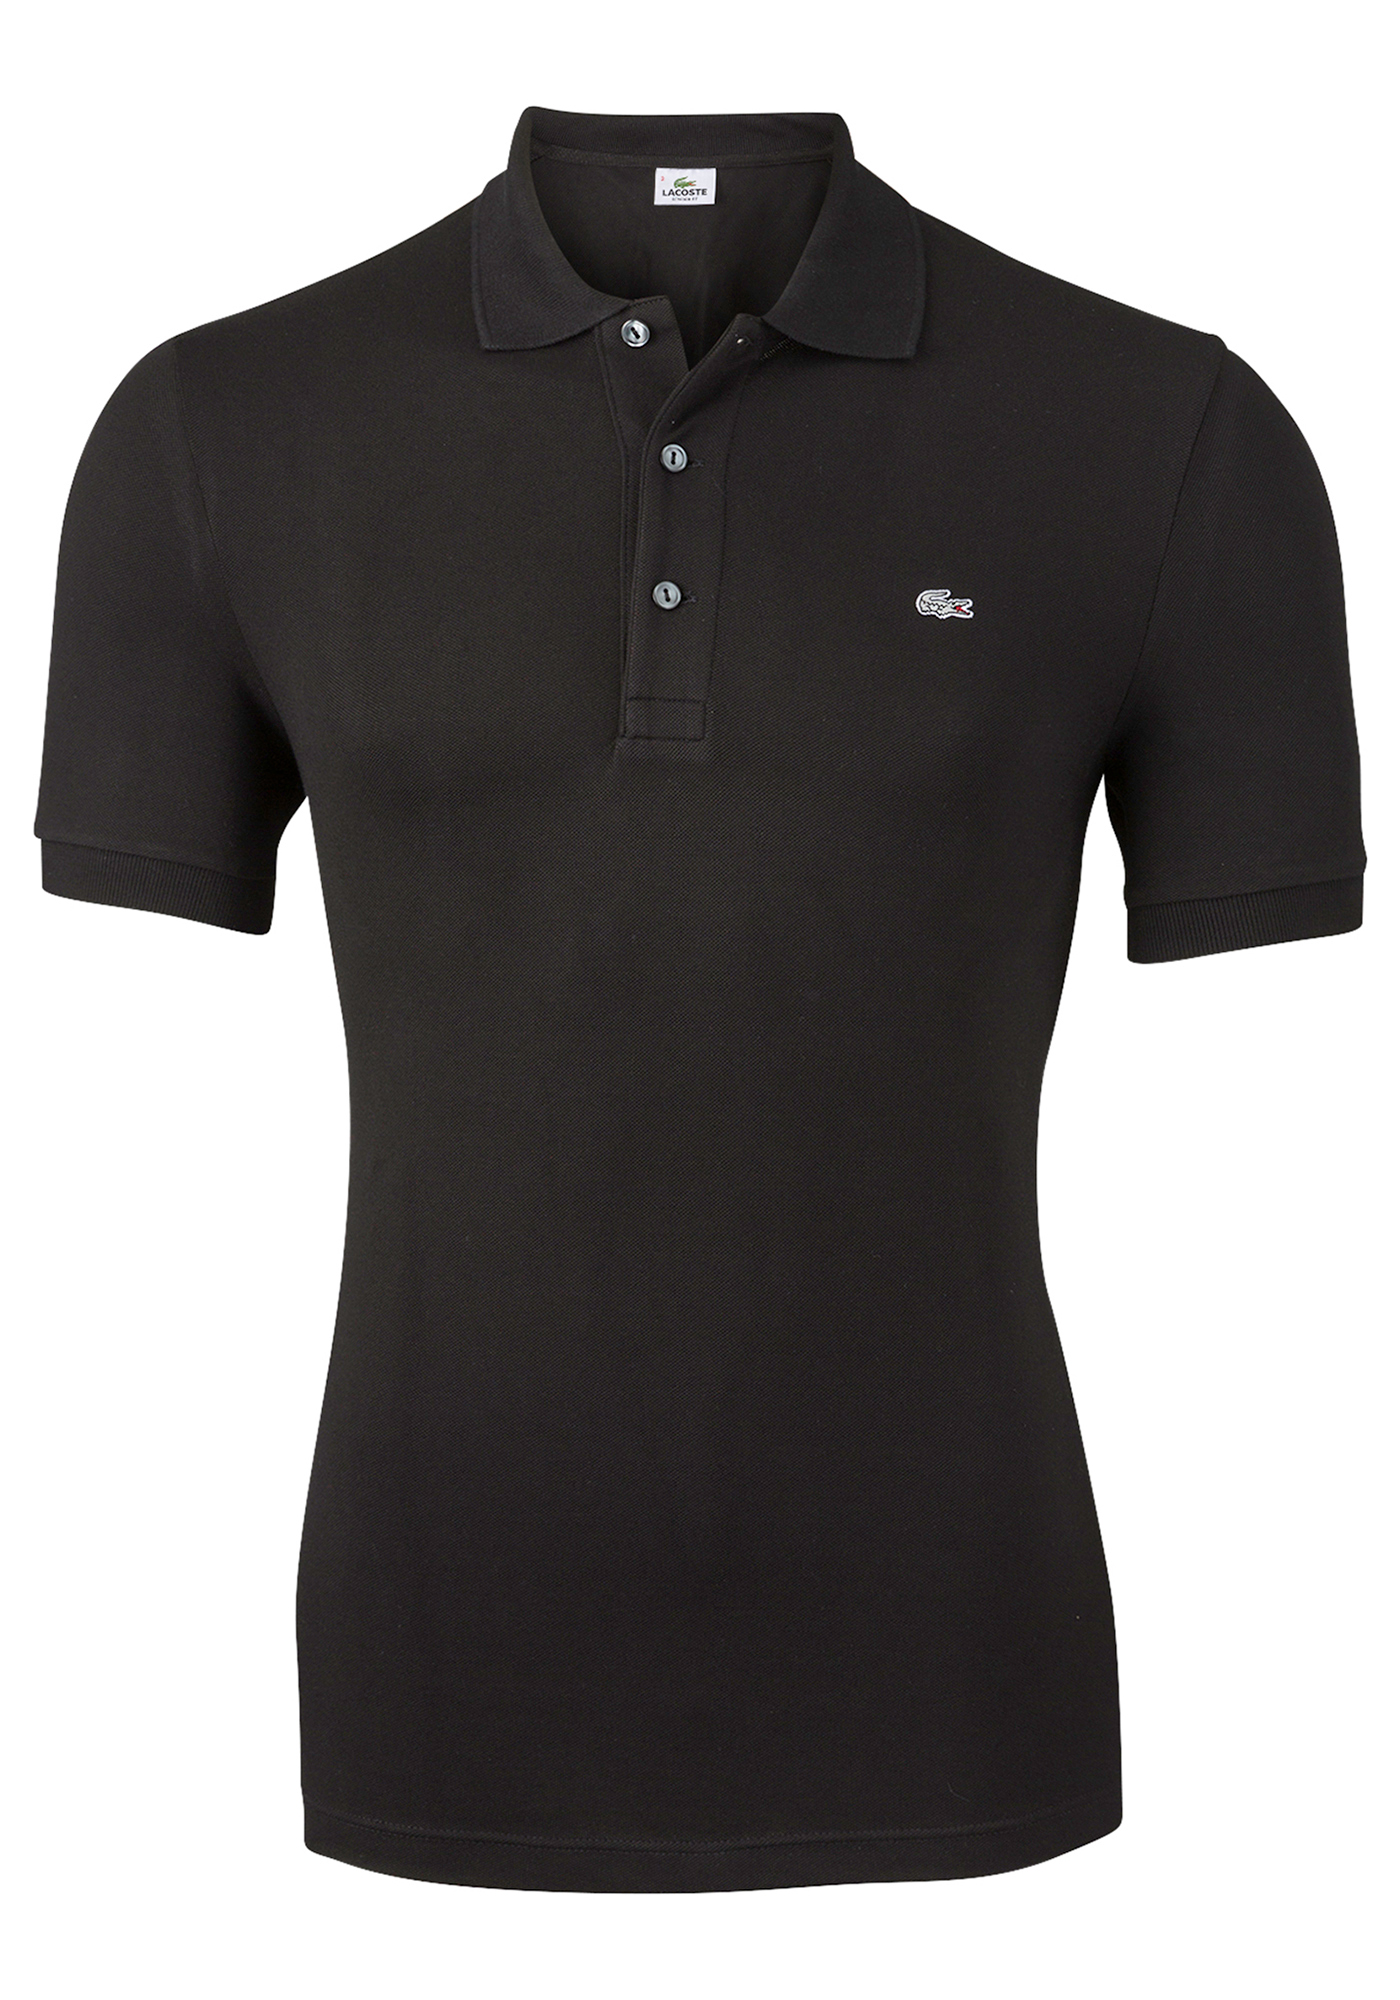 Lacoste stretch slim fit polo, heren polo extra getailleerd, zwart